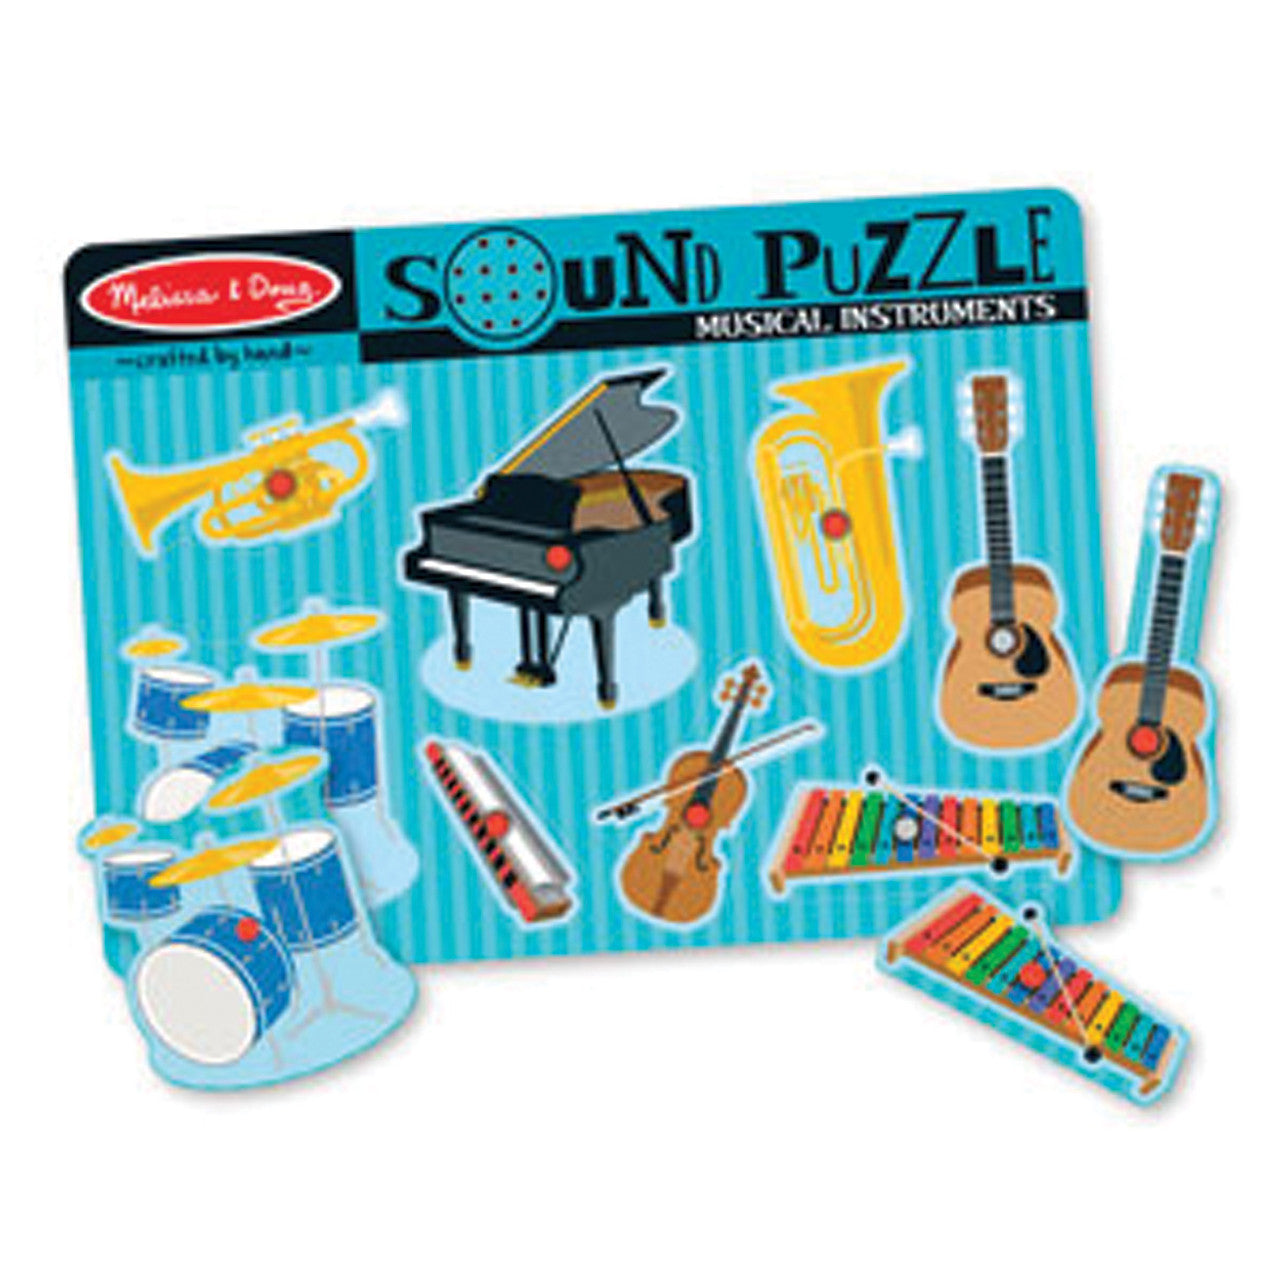 Talking Musical Instruments Sound Puzzle is more than just fun for children, it offers many learning opportunities. Puzzles increase vocabulary, develop hand-eye coordination, improve memory, and build literacy skills. Our 8-piece Talking Musical Instruments Sound Puzzle adds another dimension by enabling a child's musical talents and enhancing listening skills.